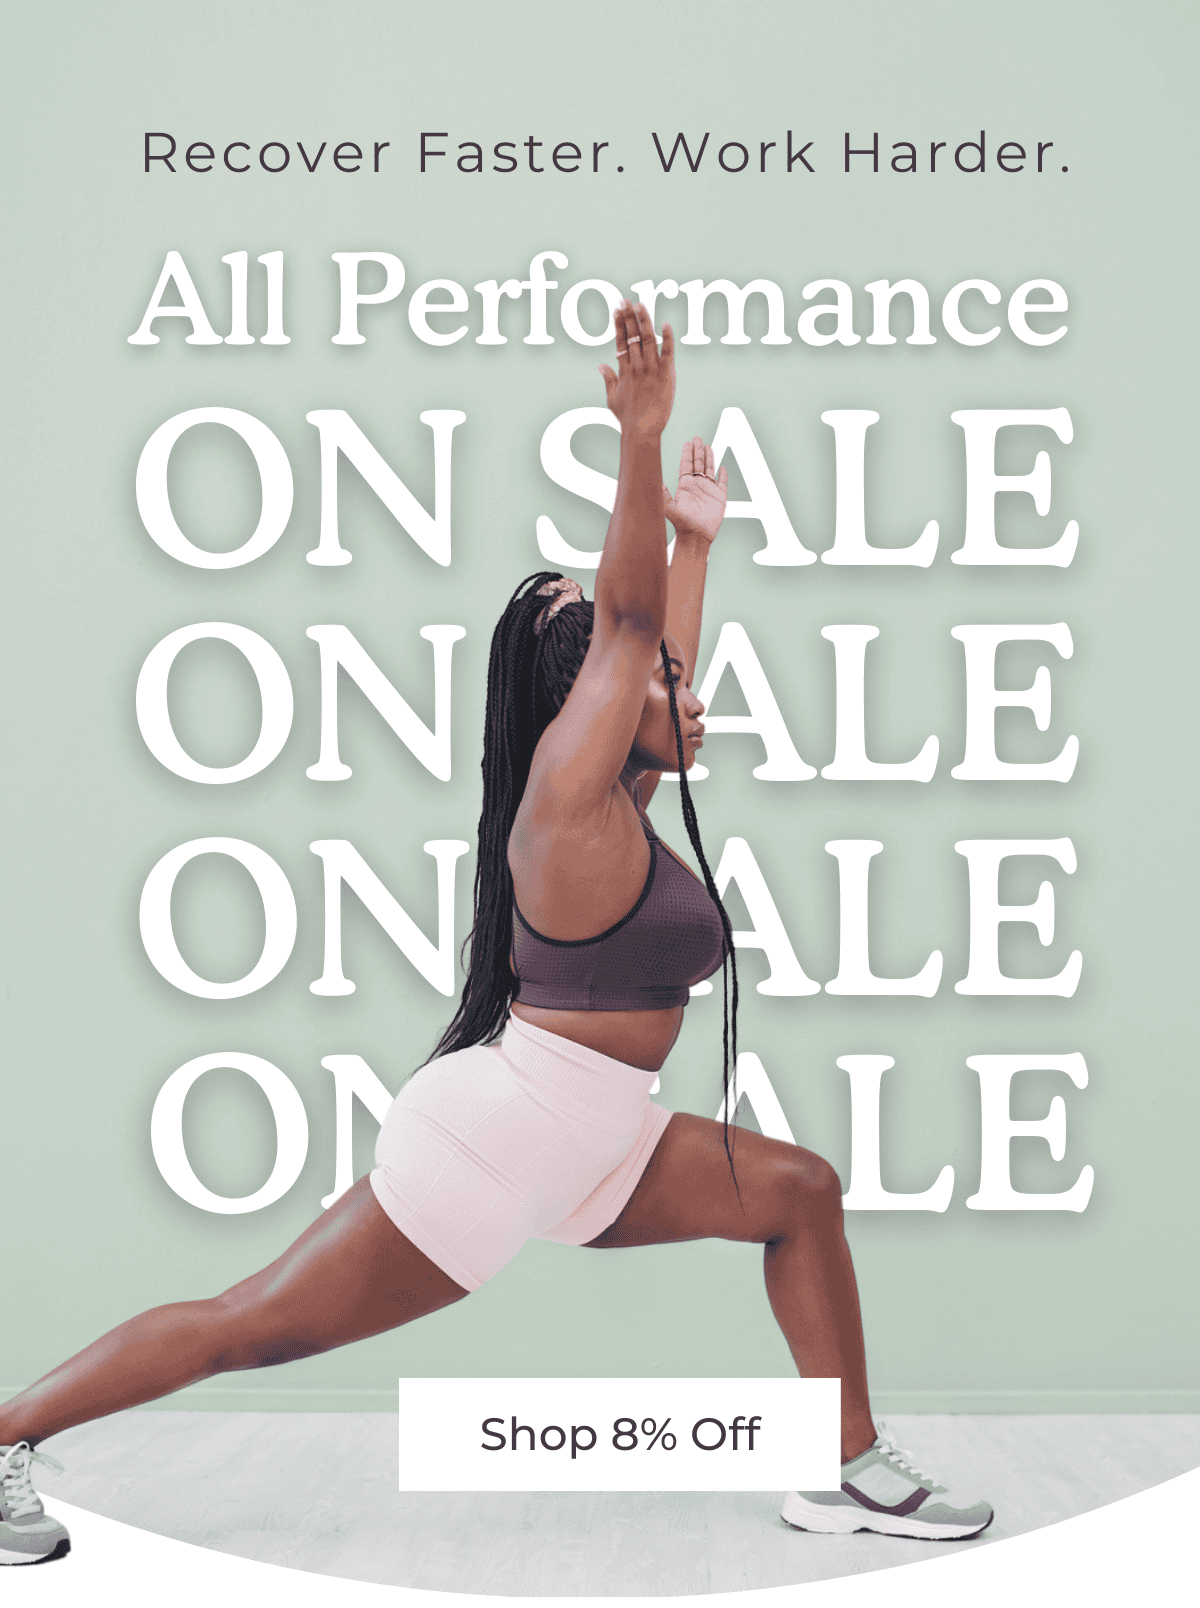 Recover Faster. Work Harder. All Performance On Sale! SHOP 8% OFF